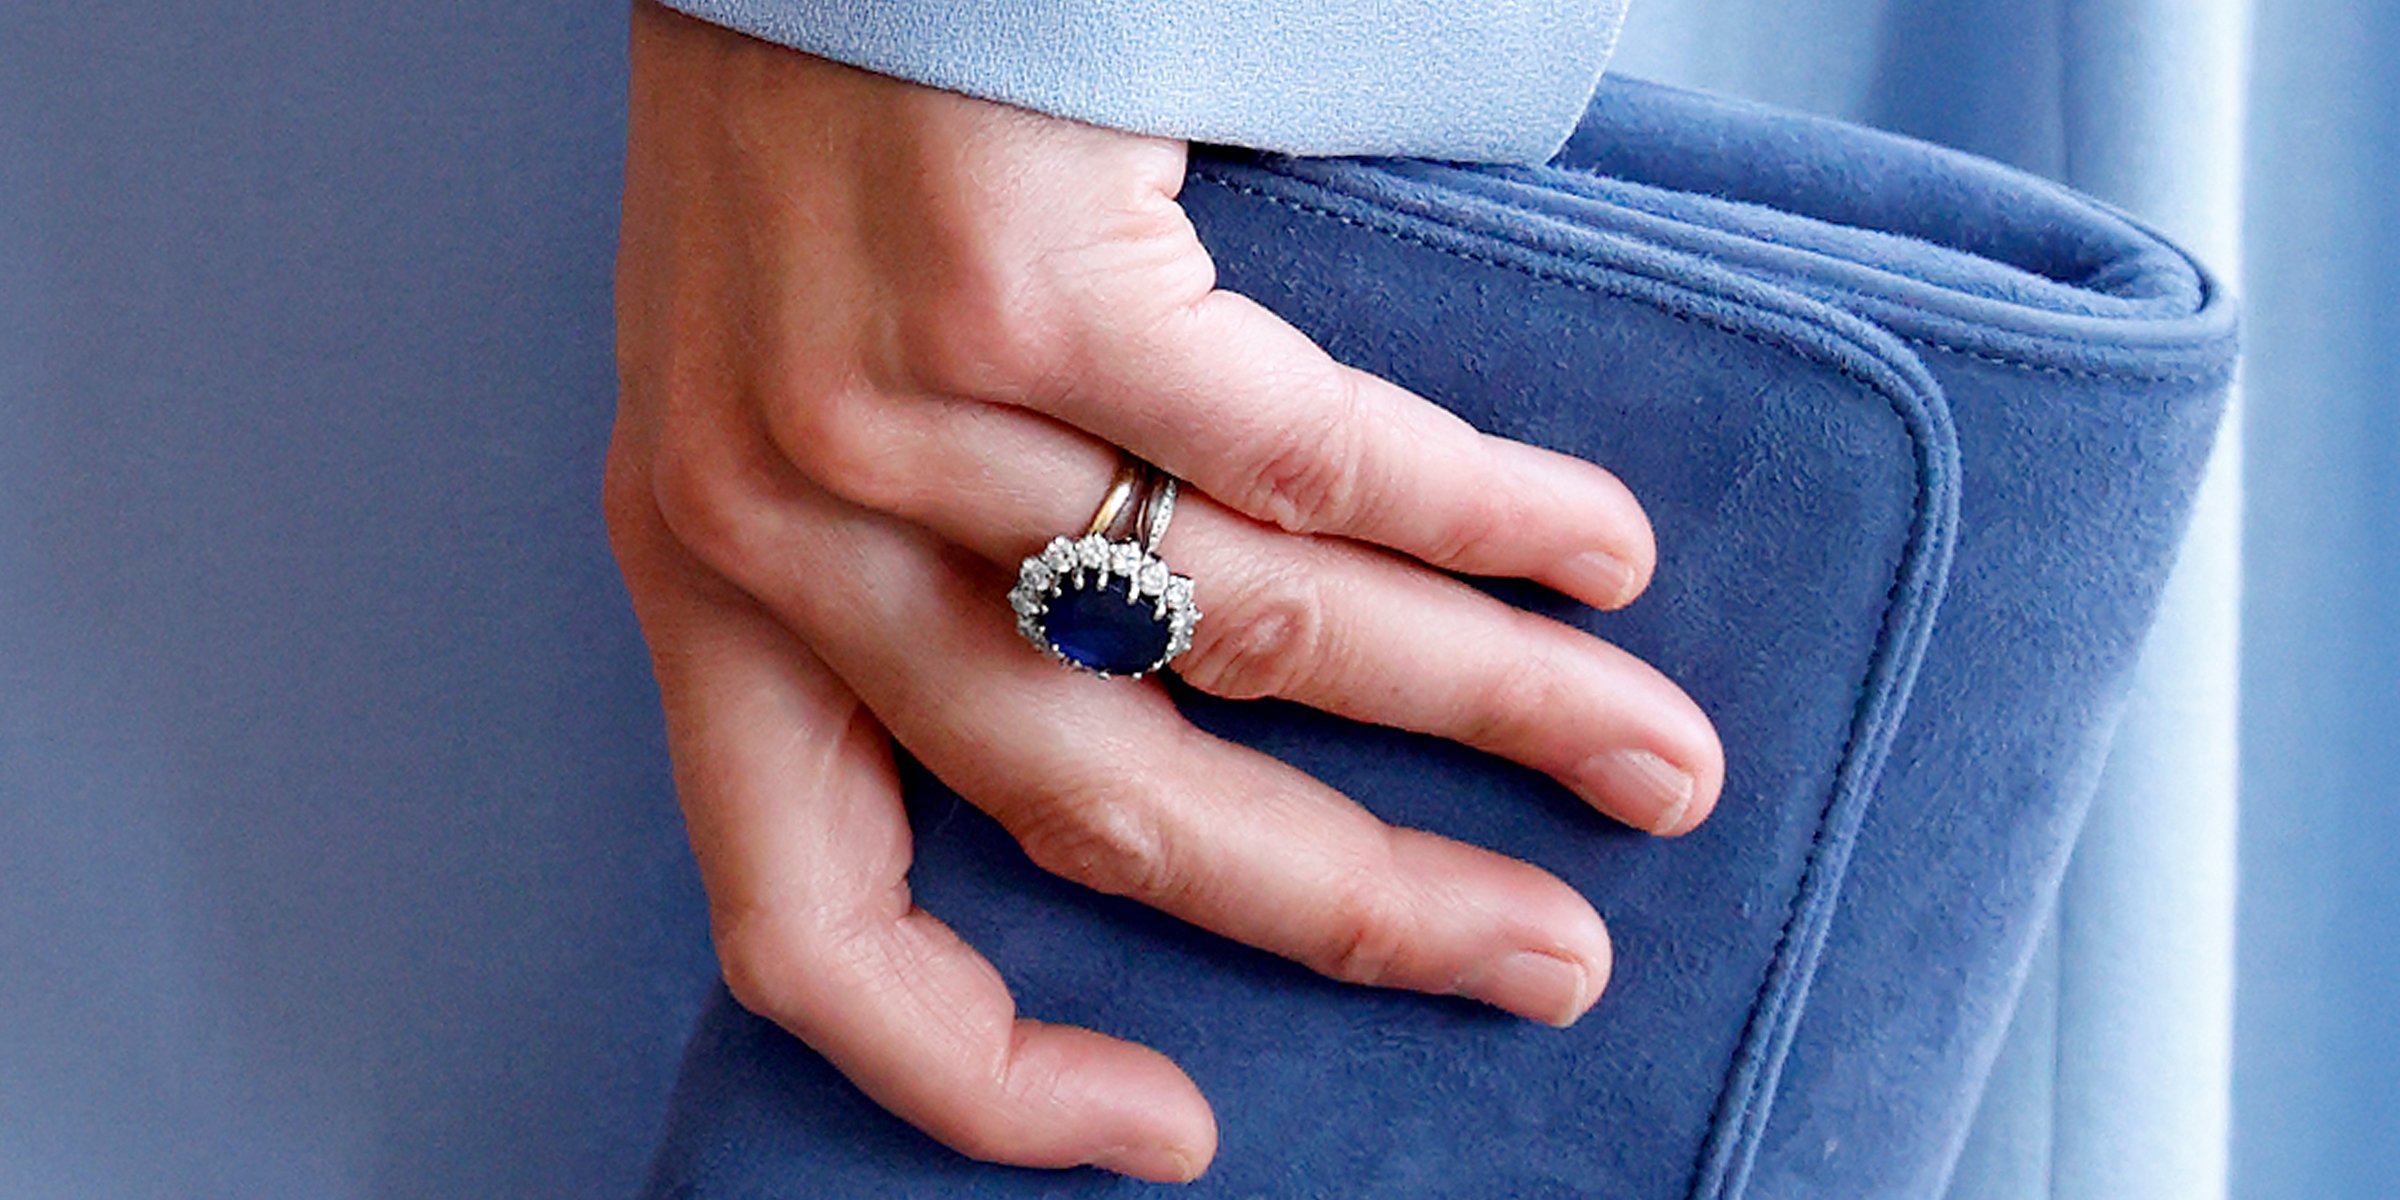 Close-up of an engagement ring | Source: Getty Images